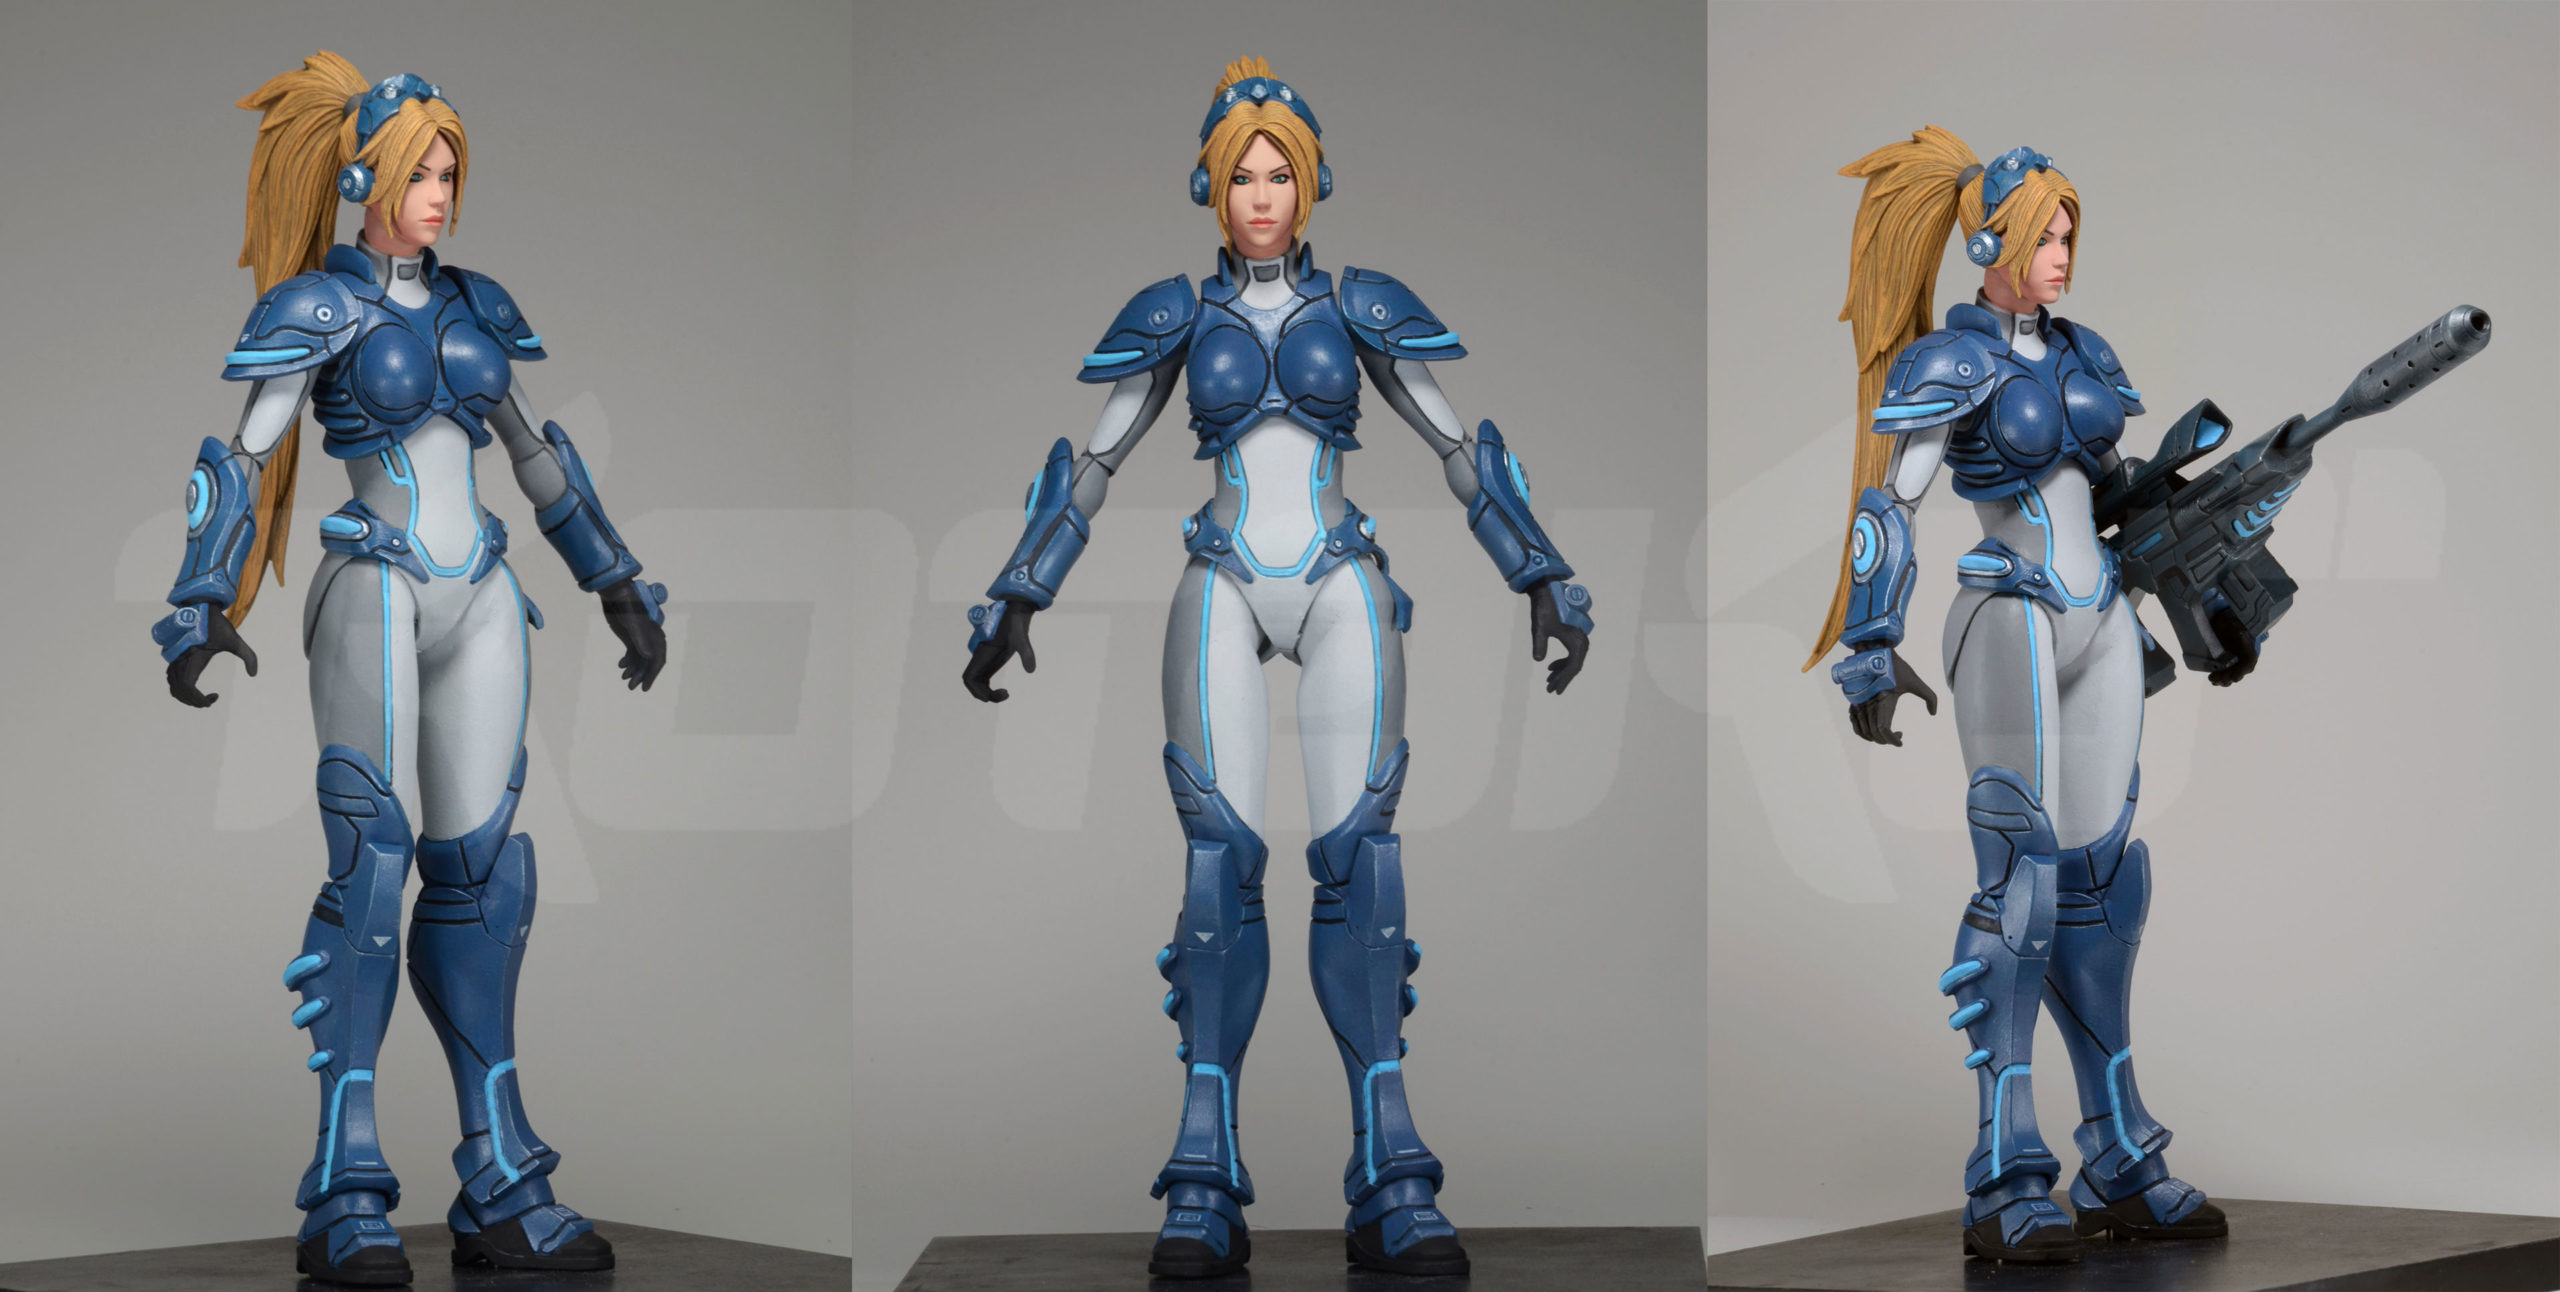 The All-Star Blizzard Toy Line We’ve Always Wanted